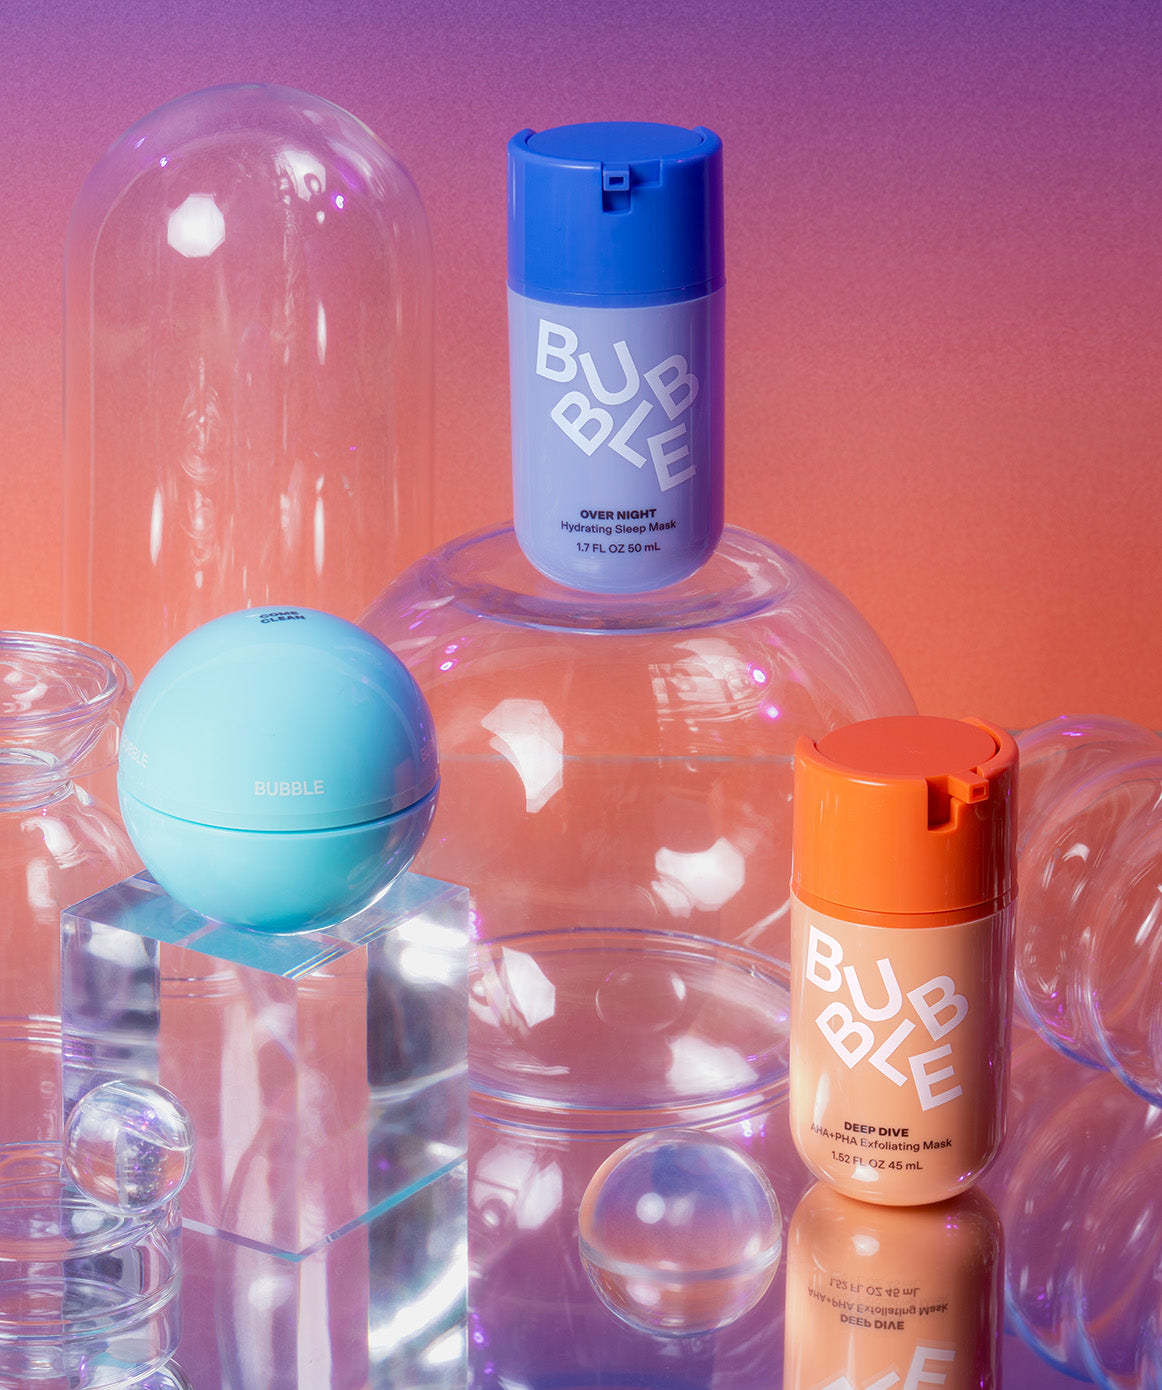 Bubble Skincare: What Is It? And Where Can You Buy It?